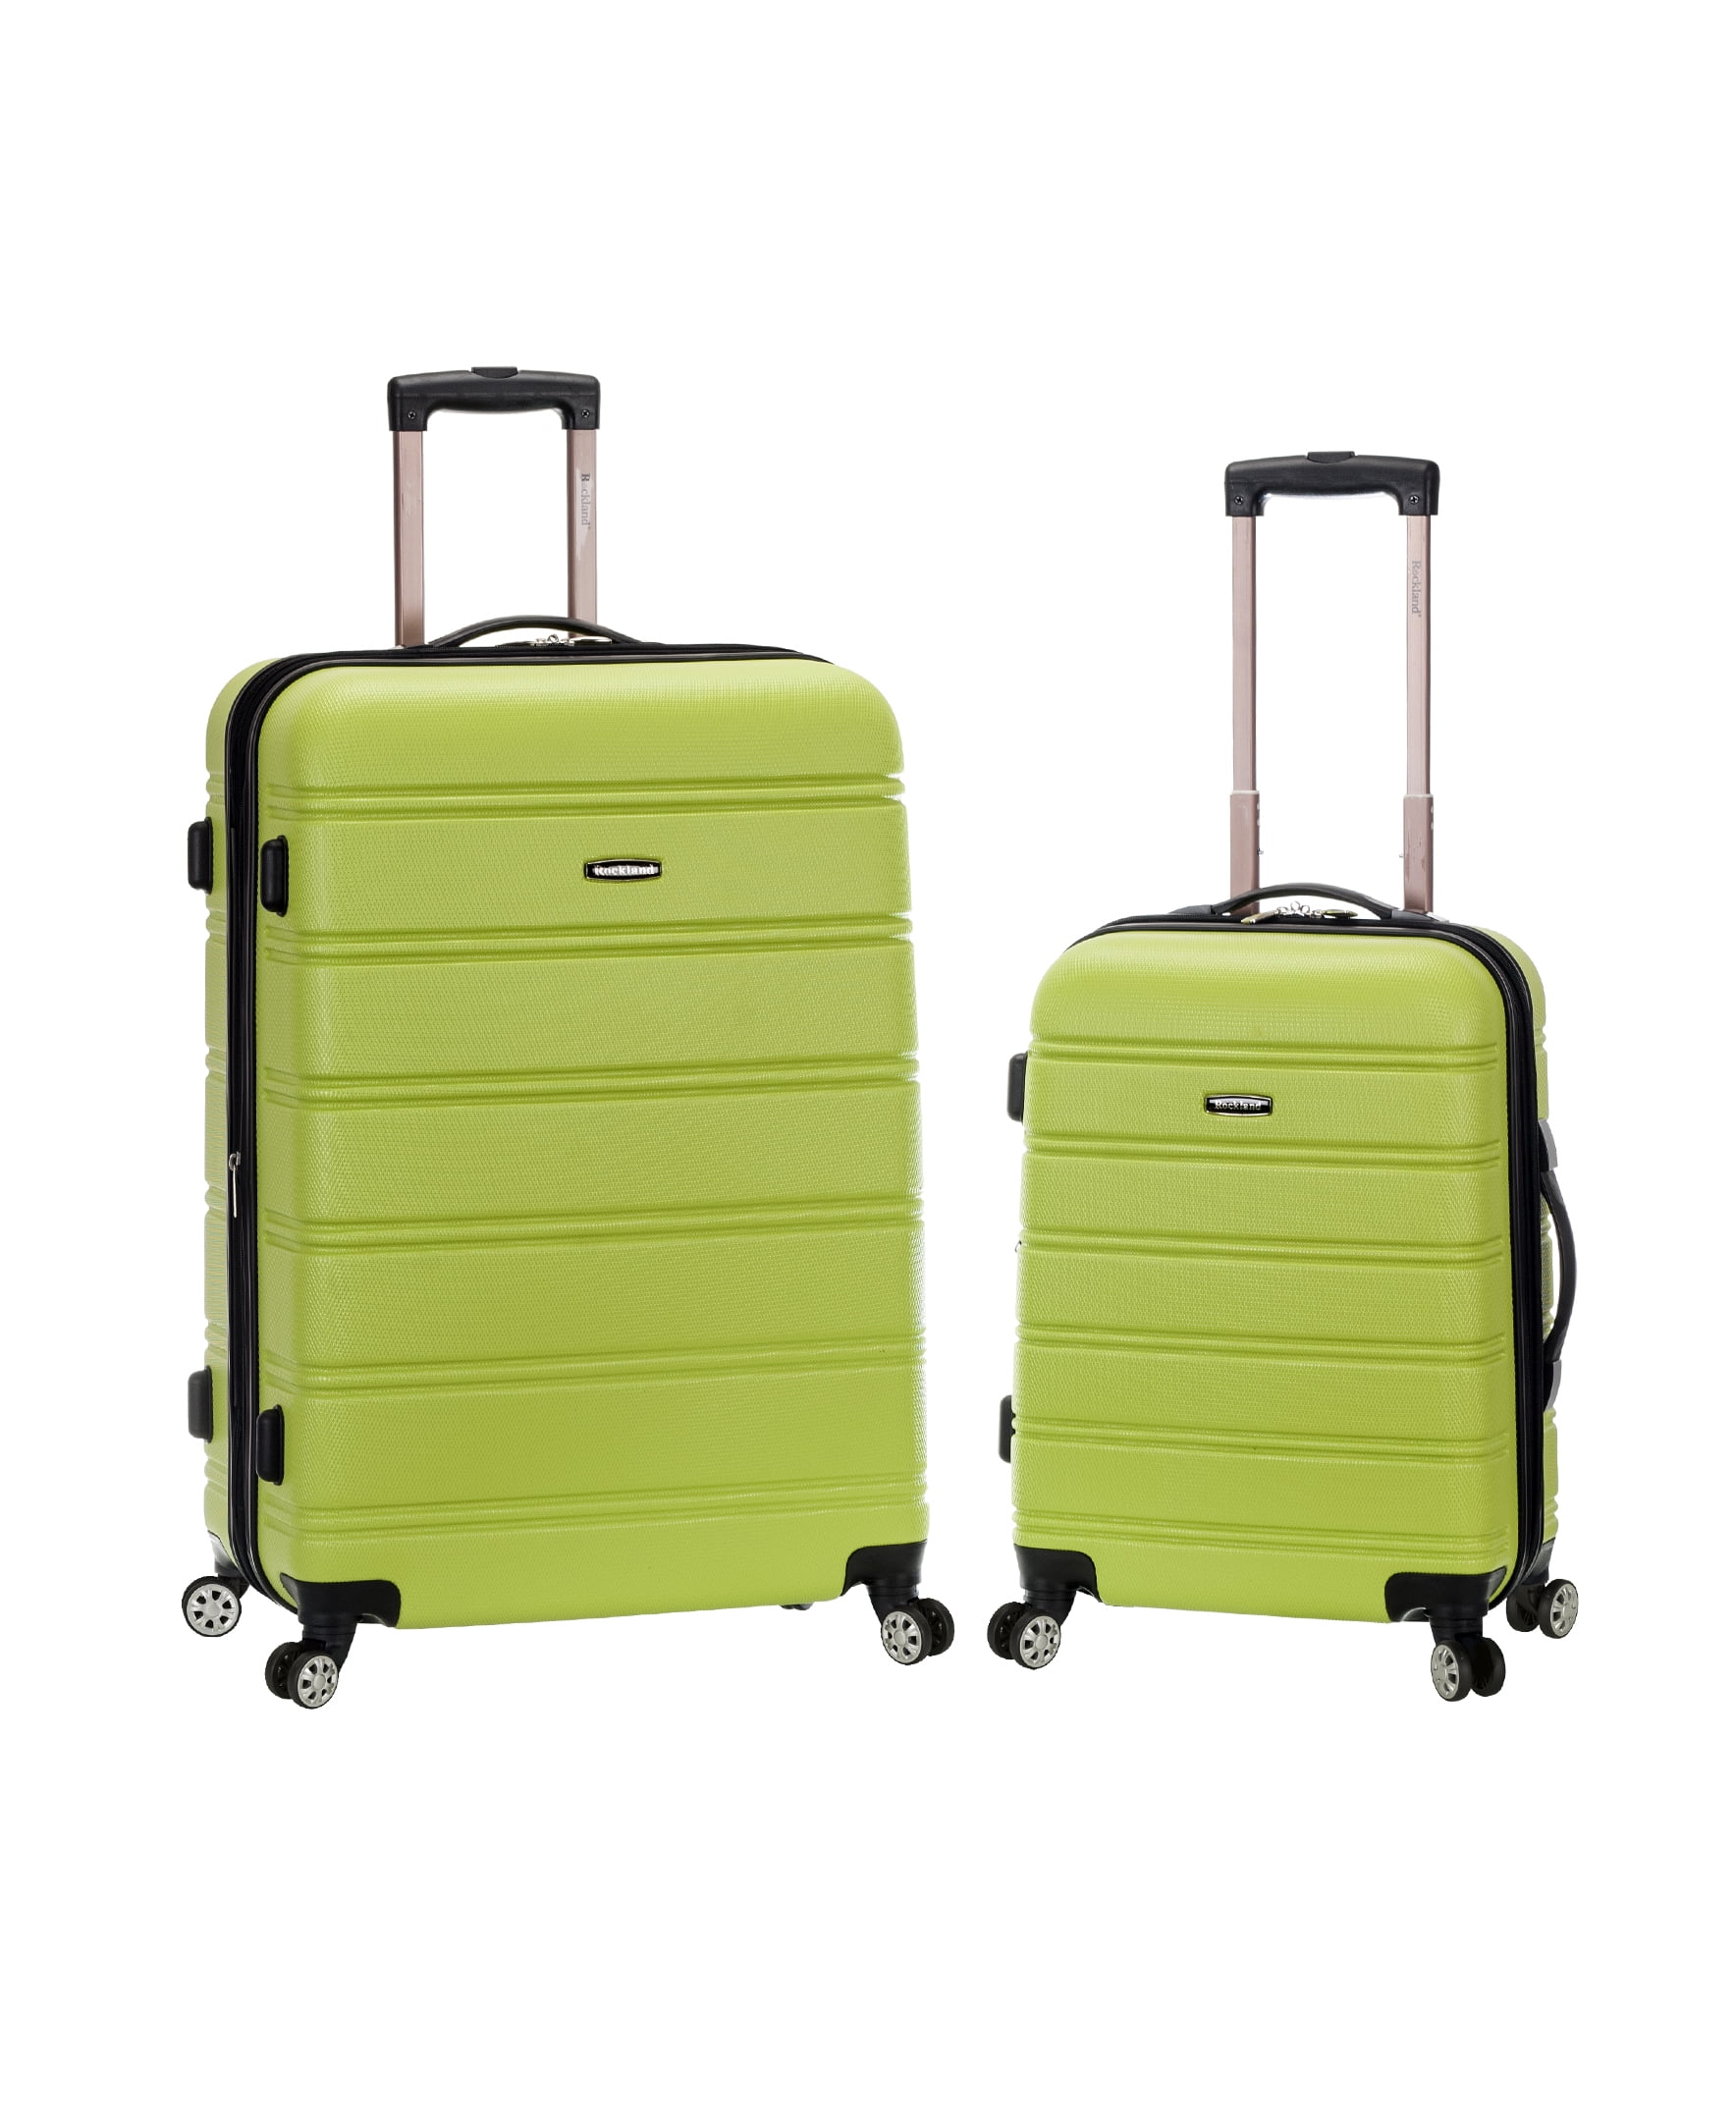 Rockland Melbourne 2pc Expandable ABS Hardside Checked Spinner Luggage Set - Lime